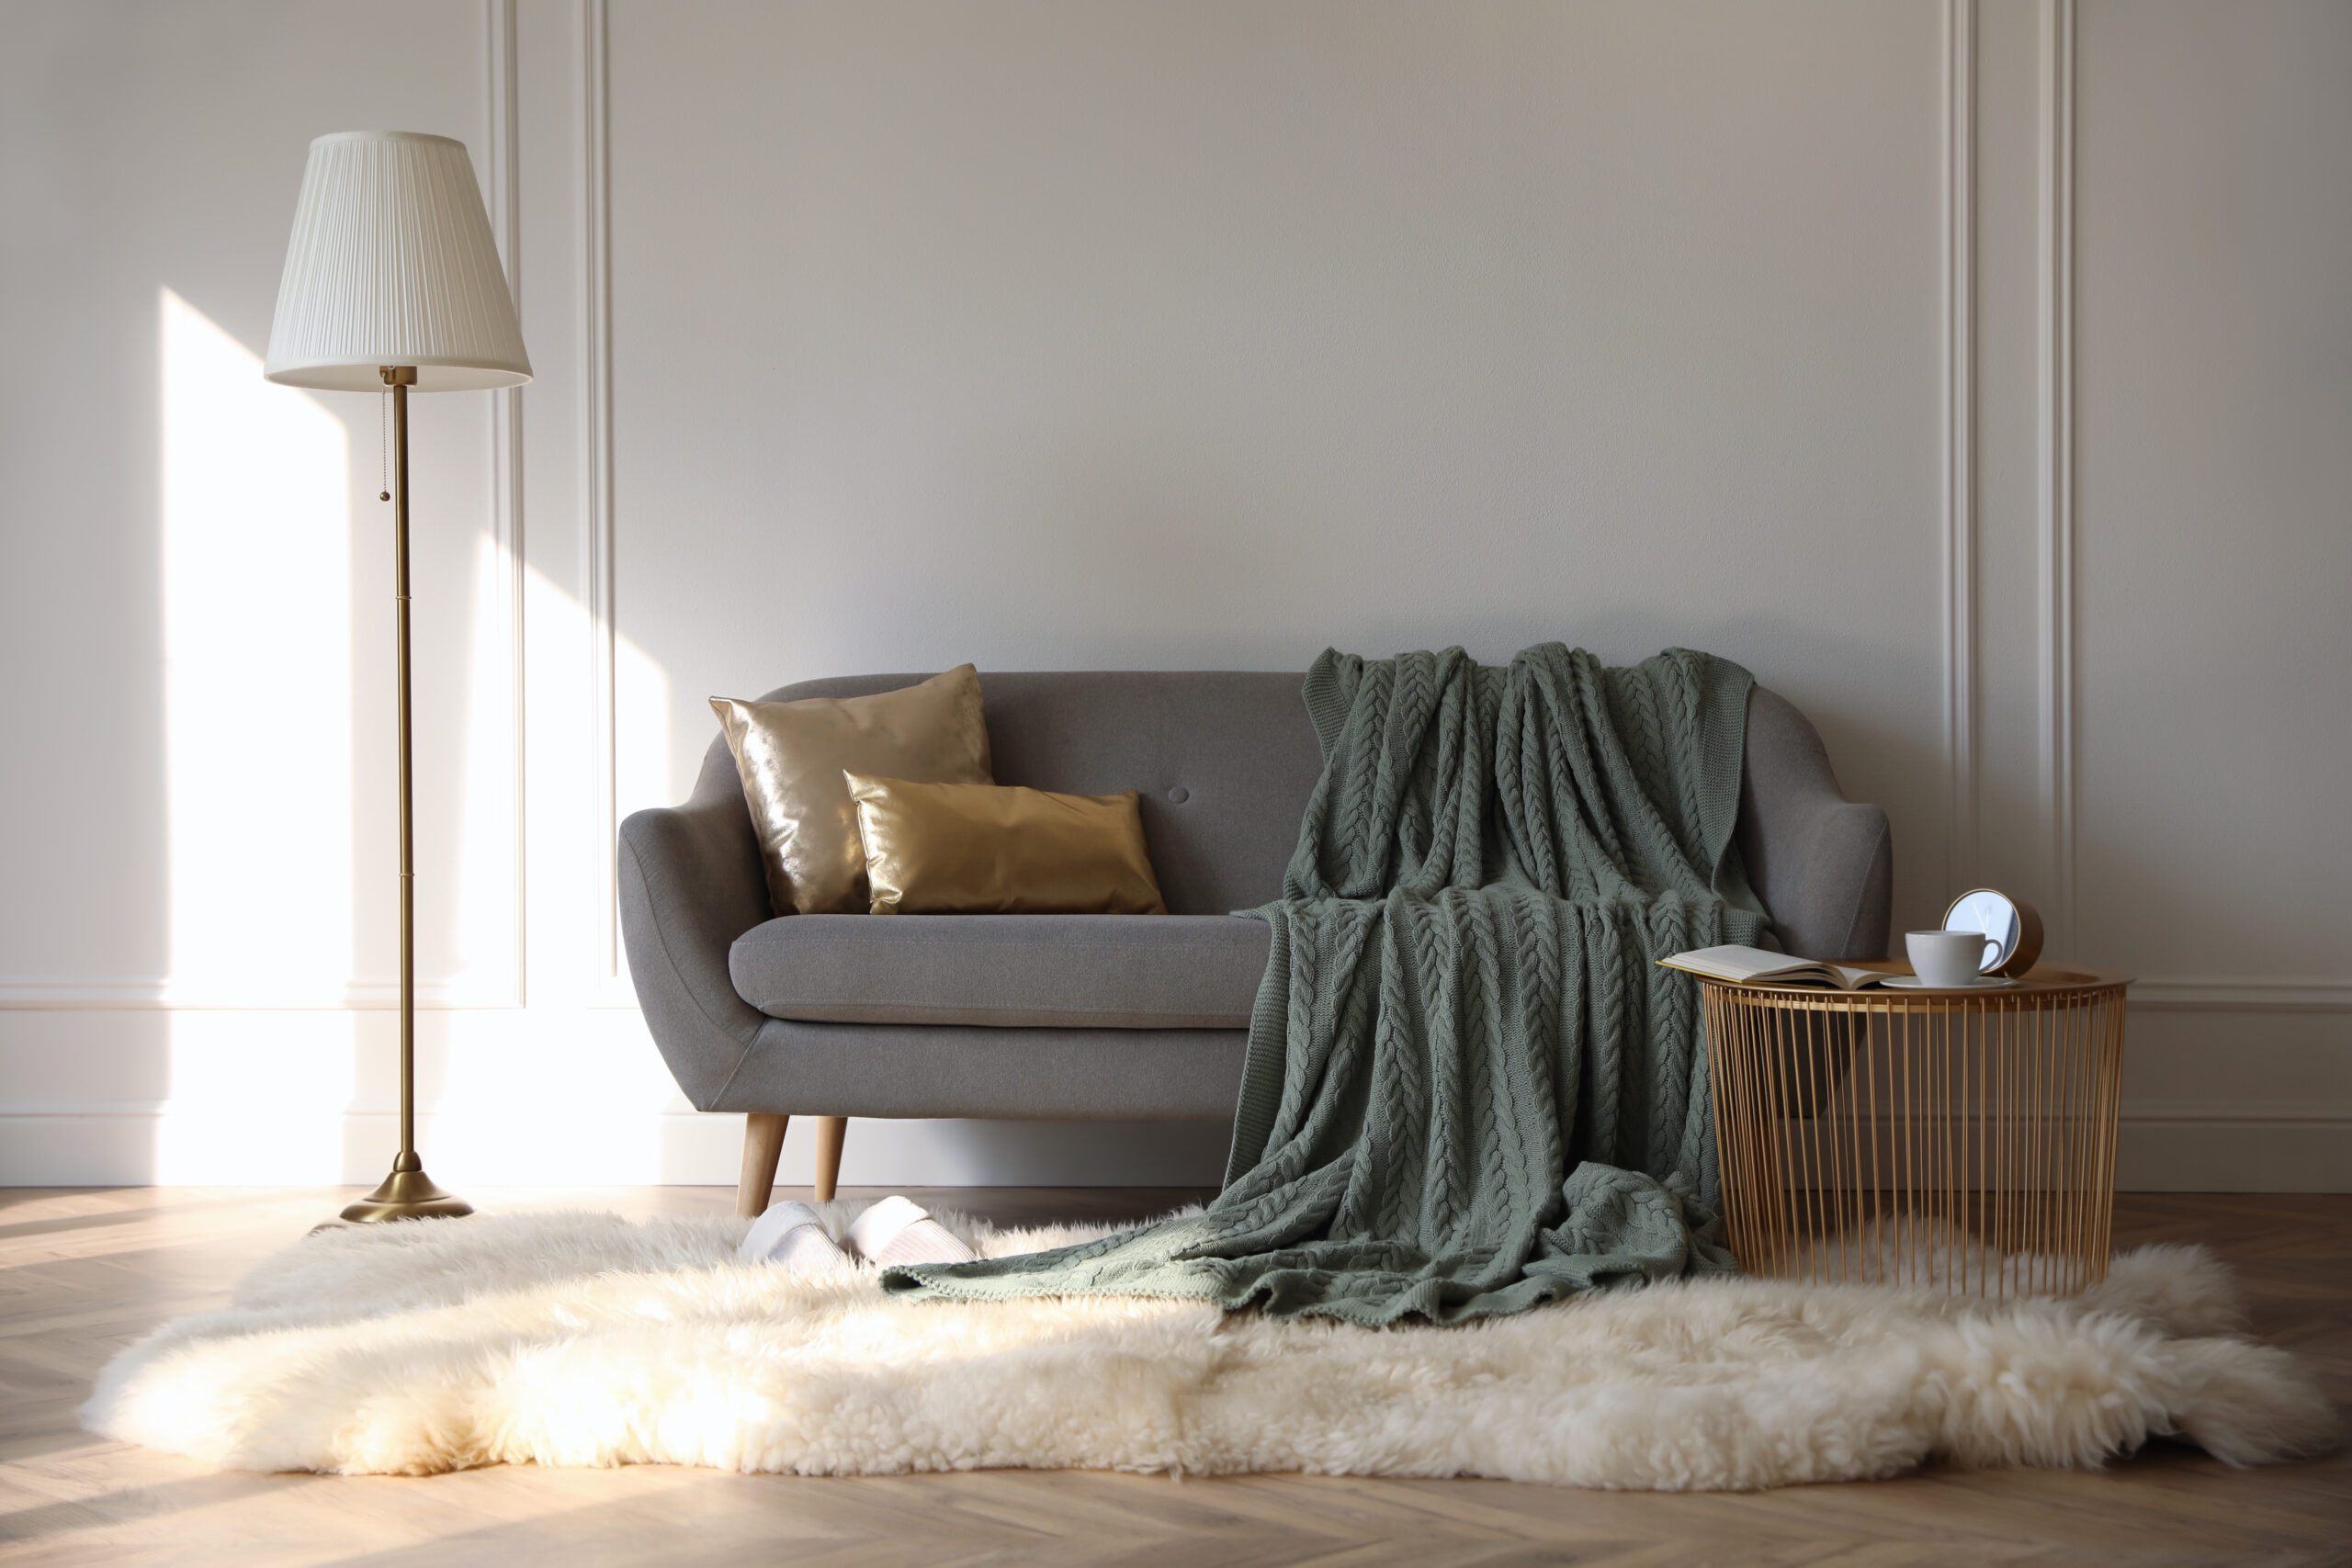 6 Essential Pieces Of Cozy Furniture That Will Warm Up Your Home This Winter